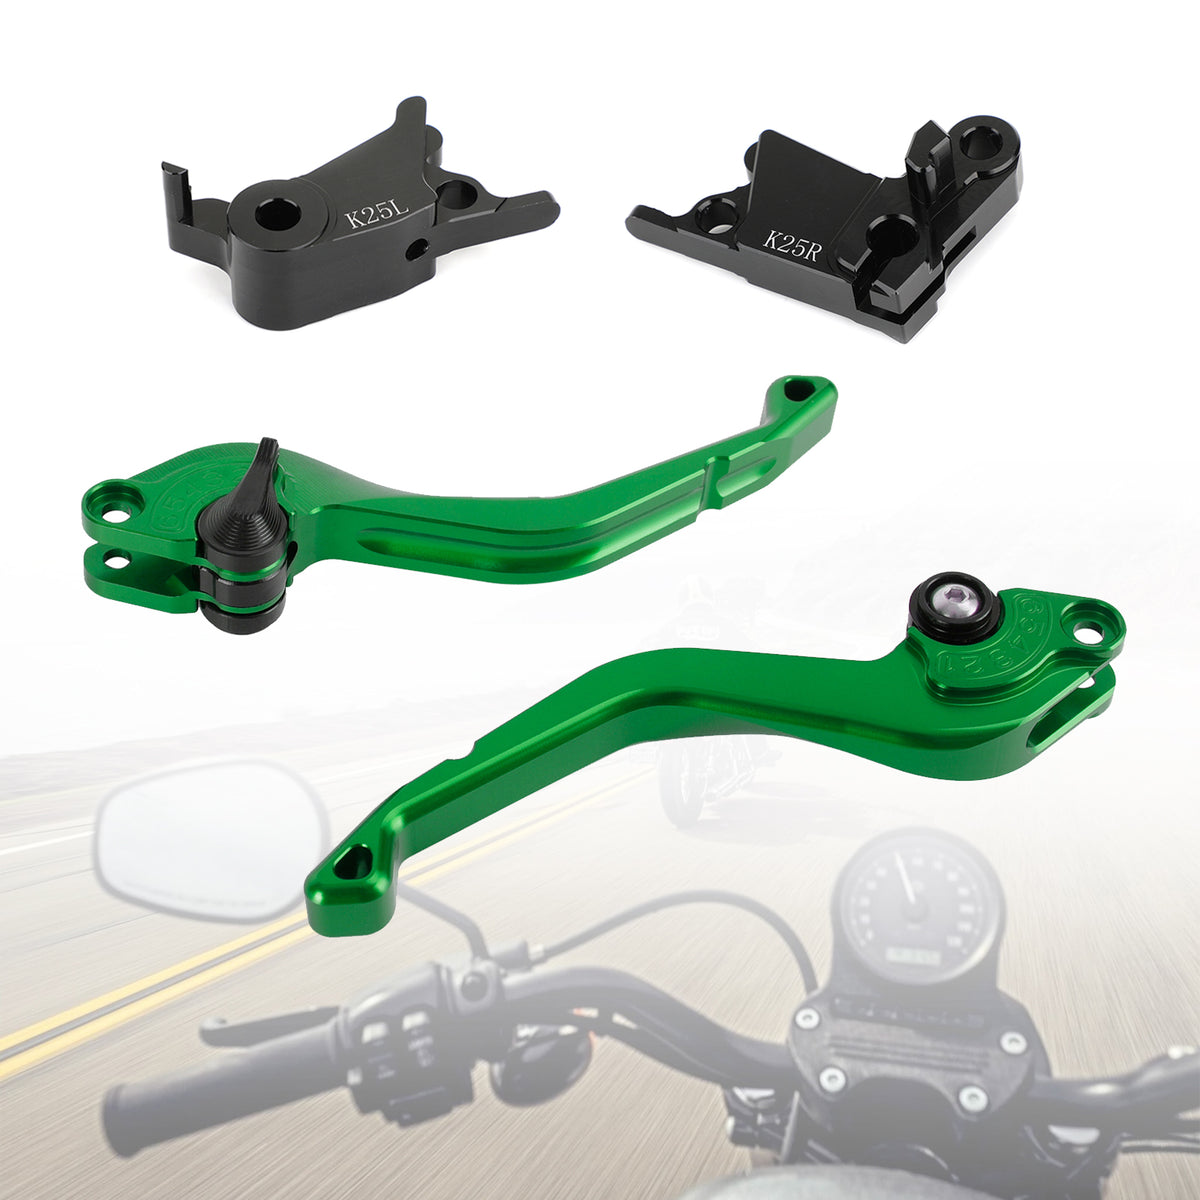 CNC Short Clutch Brake Lever fit for 790 (Before 2019)